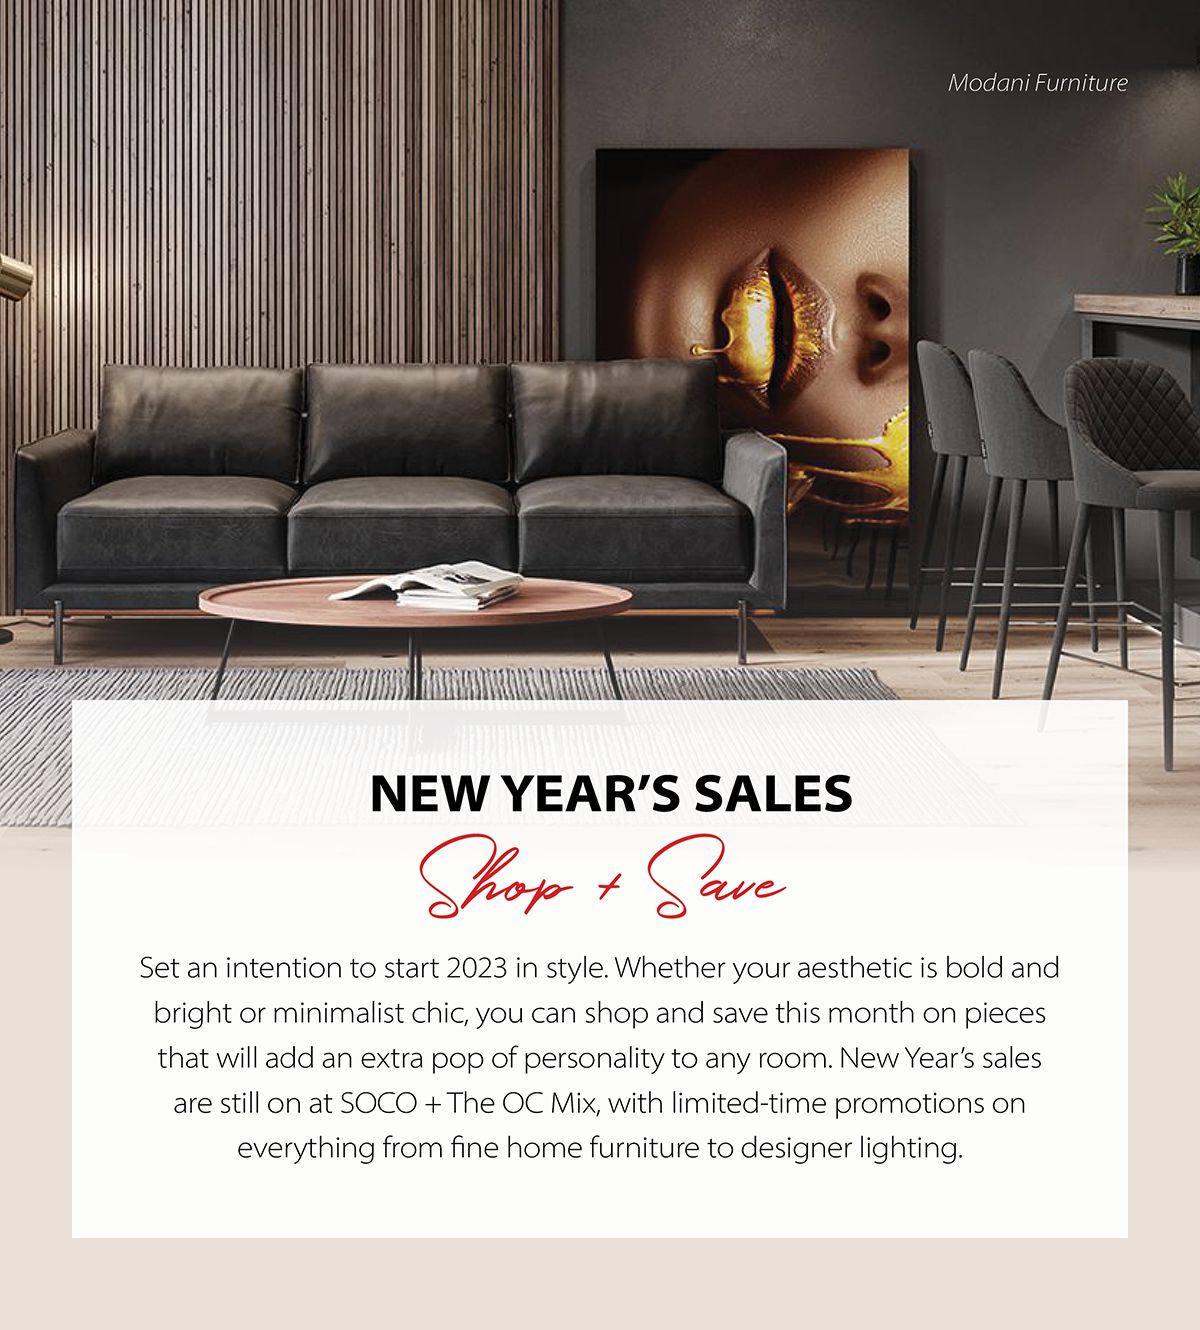 New Year’s sales are happening now!